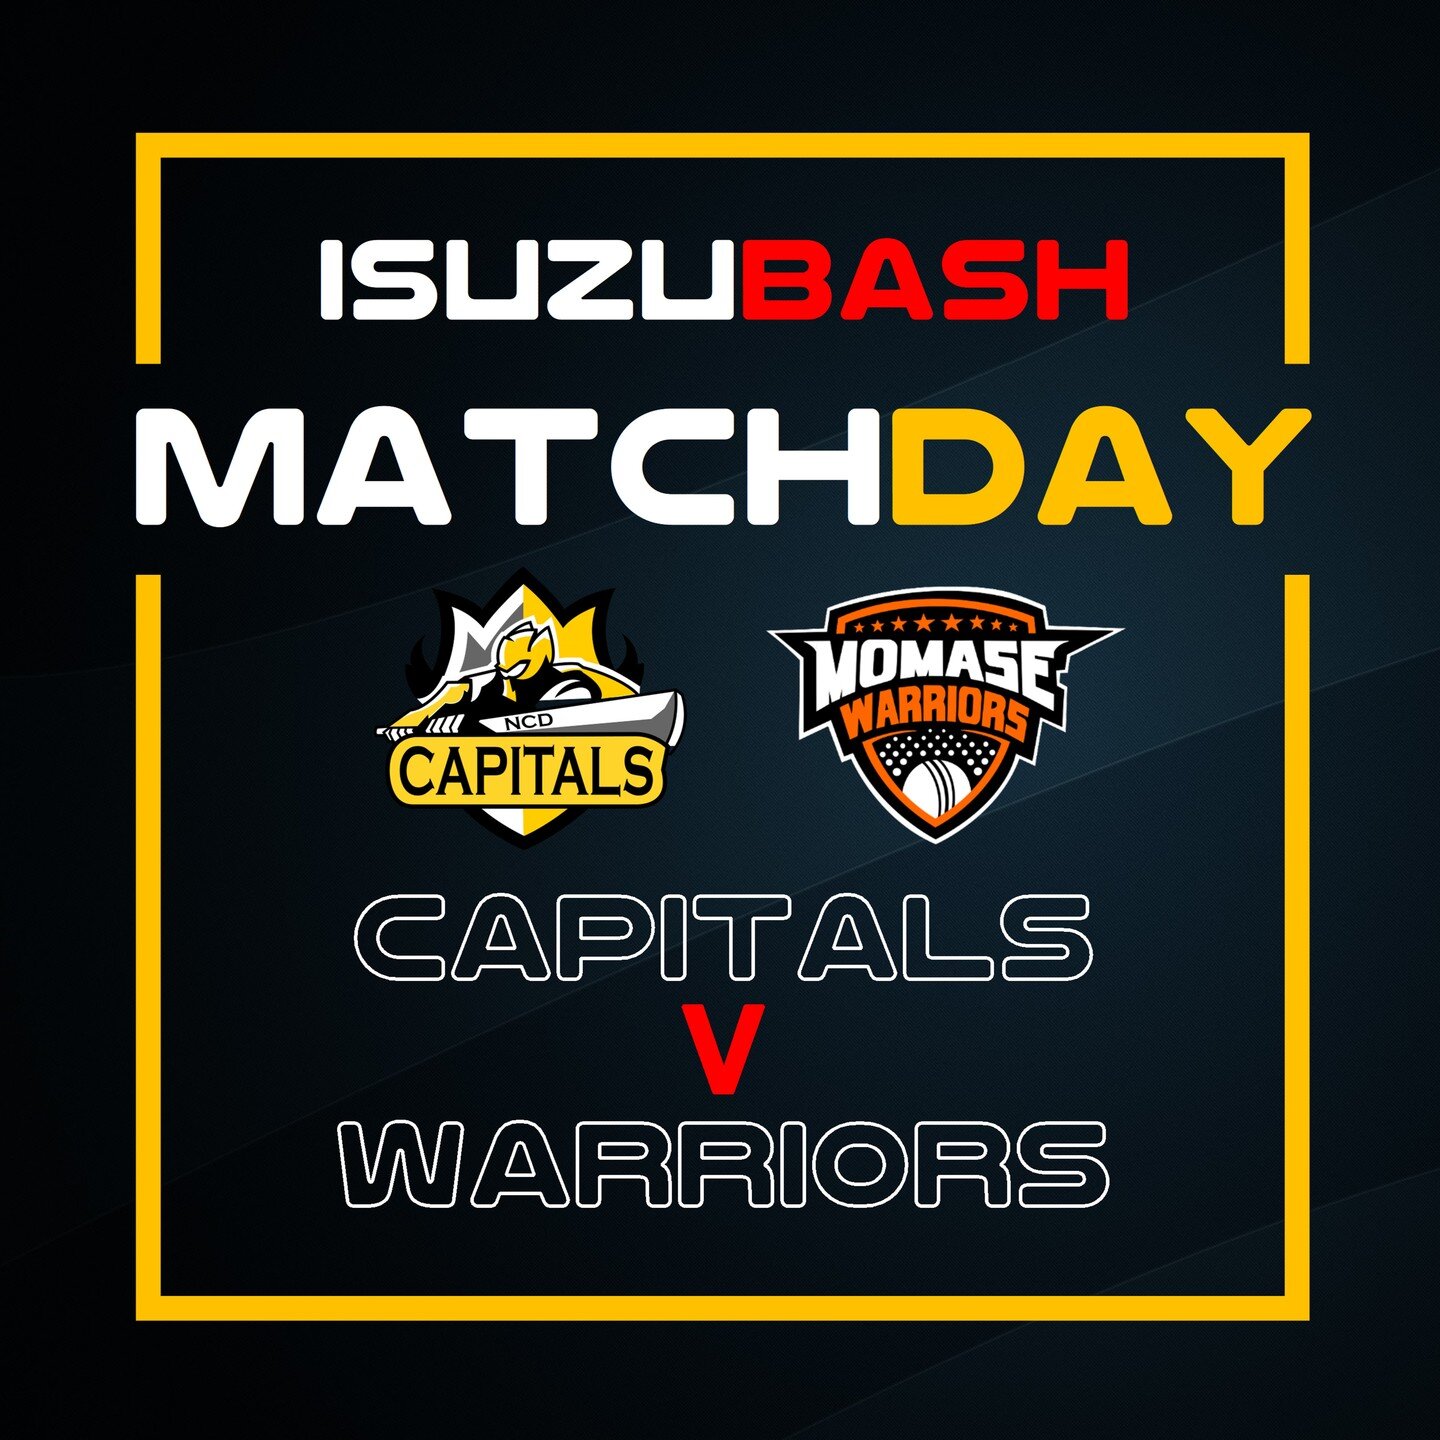 MEN'S ISUZU T20 BASH
ROUND 2 

NCD CAPITALS 🆚 MOMASE WARRIORS
NCD won the toss and elected to bowl

THU 2 JUNE | 10:00 AM
AMINI PARK

LIVE STREAM: https://www.youtube.com/watch?v=eGli6LWmqmc
LIVE SCORE CARD: https://matchcentre.cricketpng.org.pg/mat